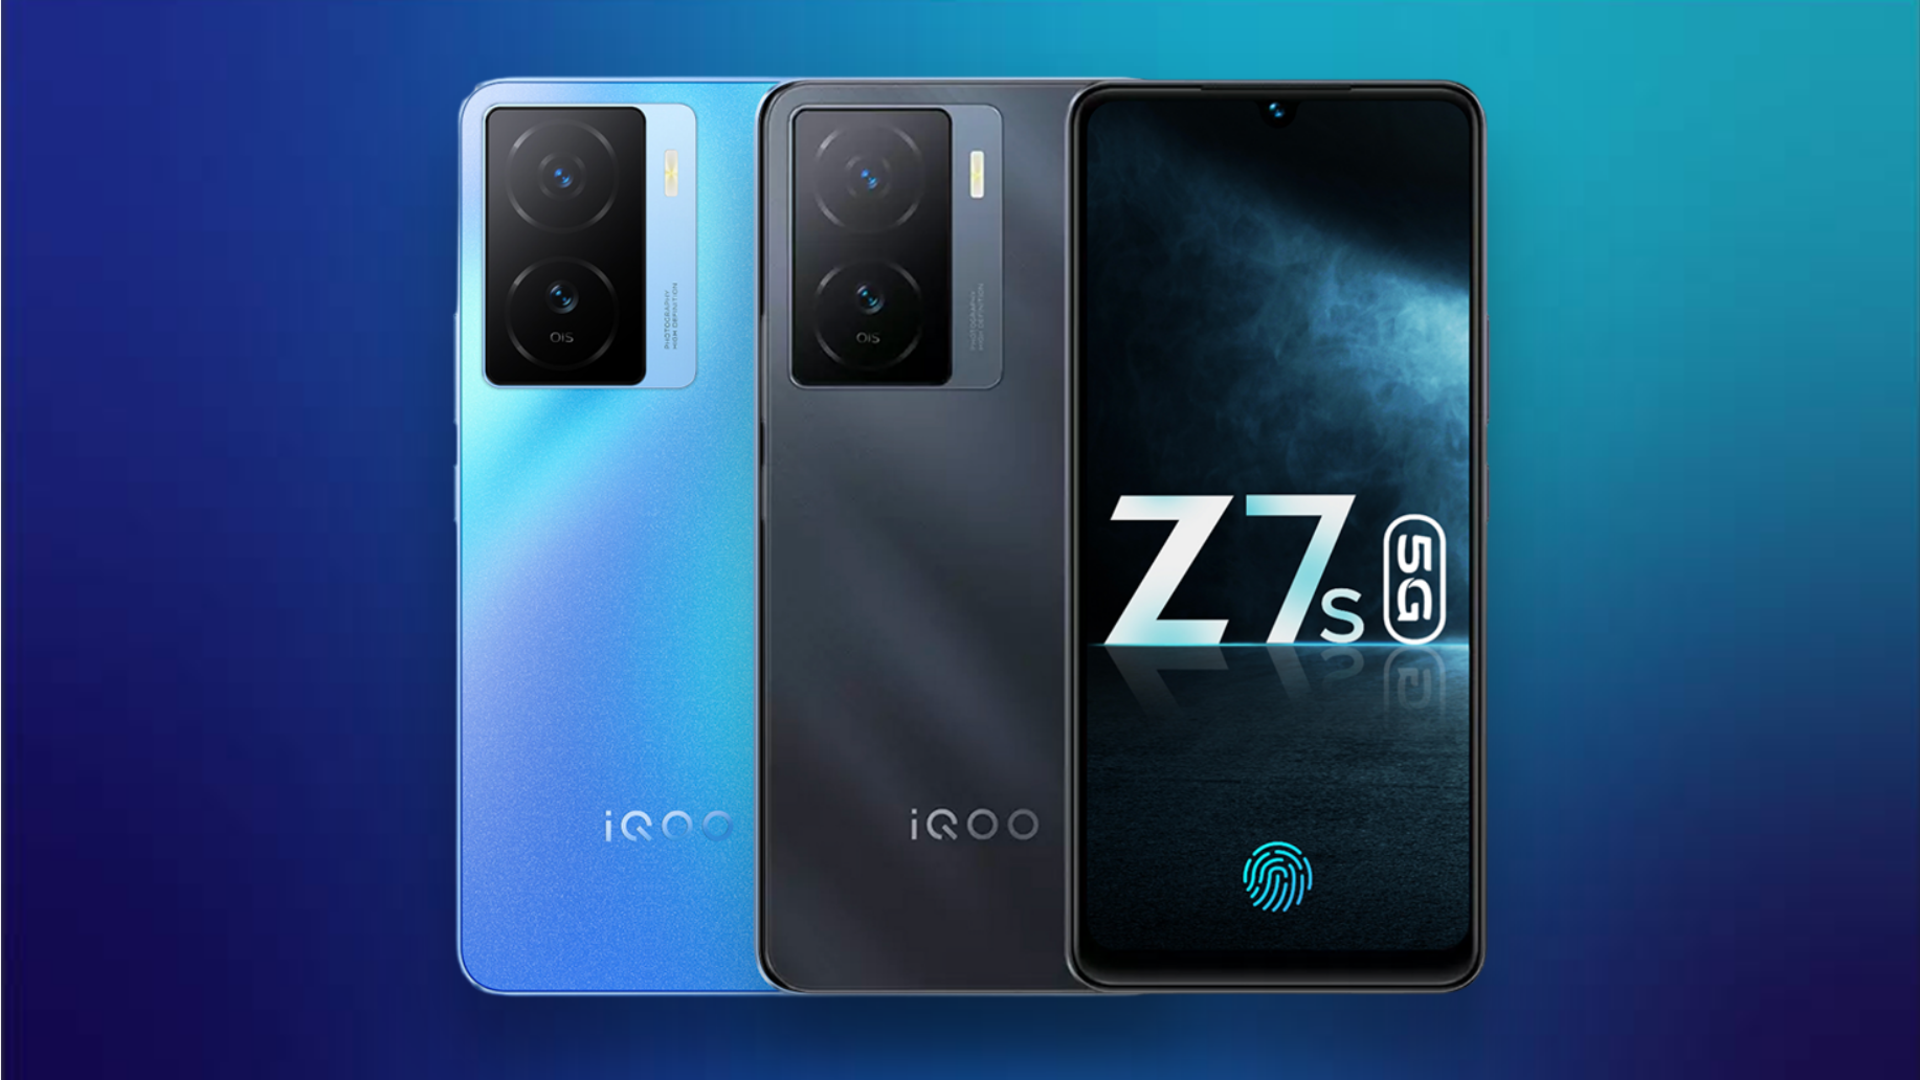 iQOO Z7s goes official in India: Check price and features